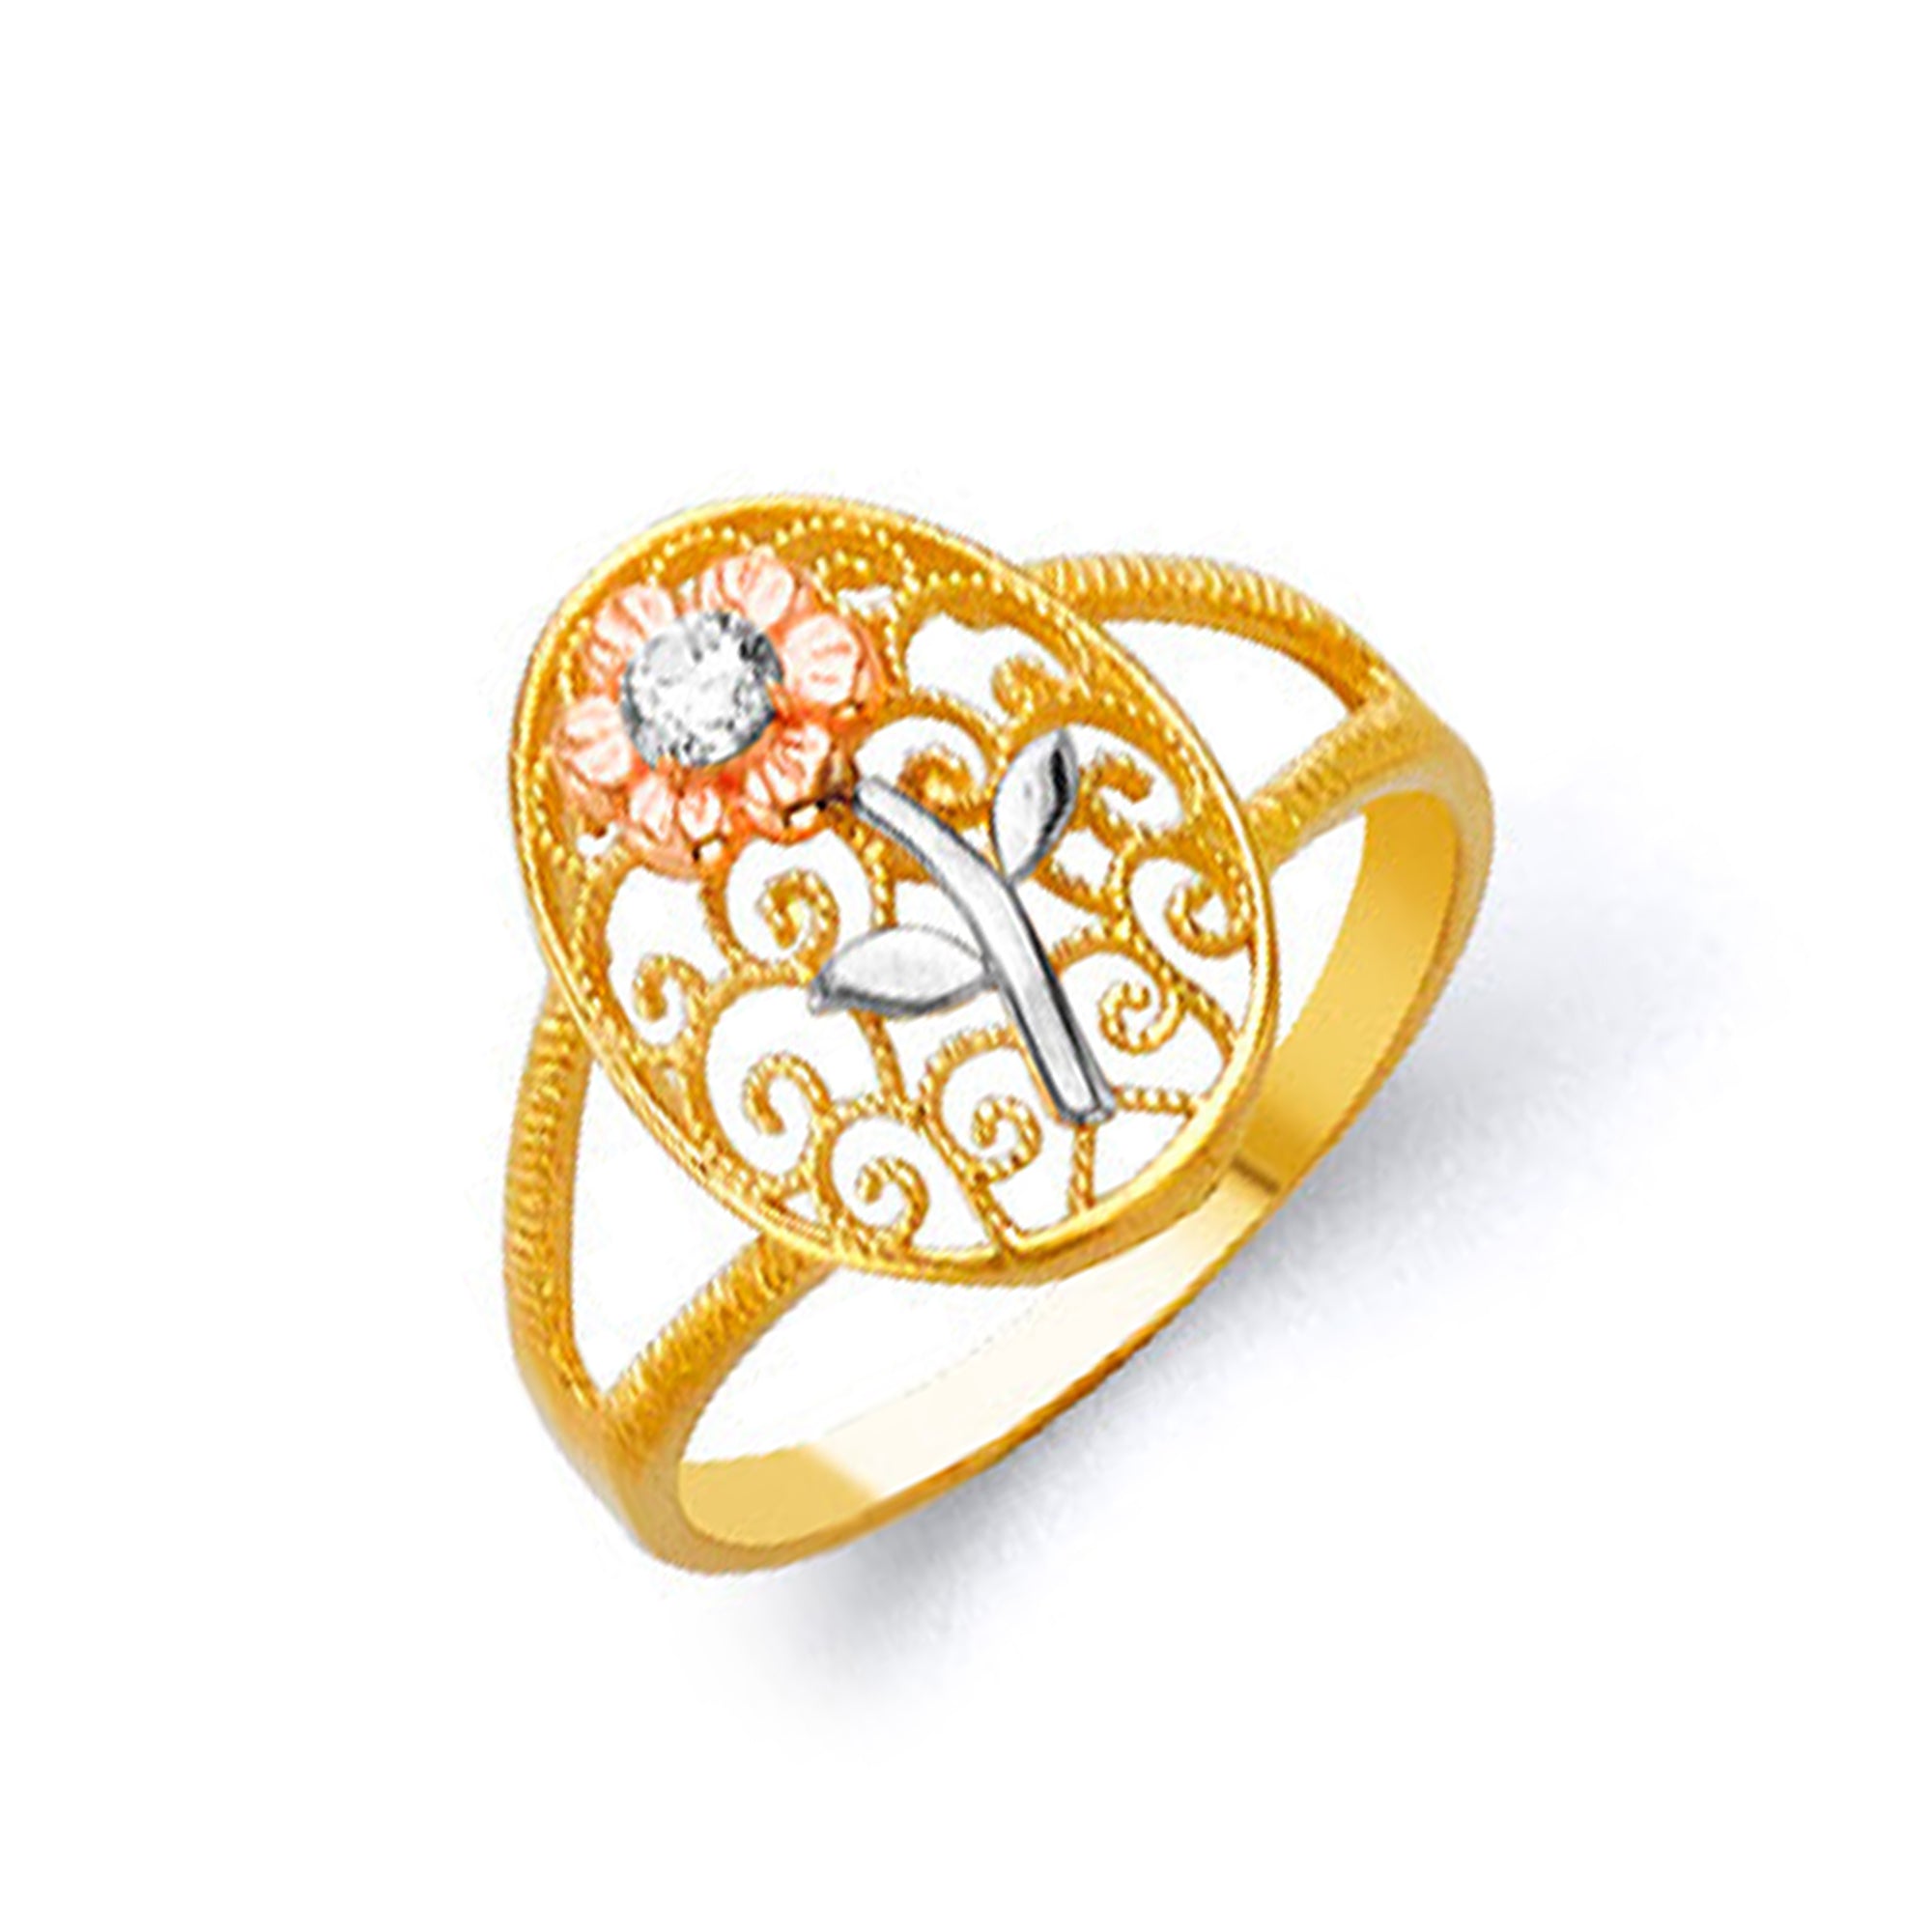 Soothing Sunflower Motif Ring in Solid Gold 